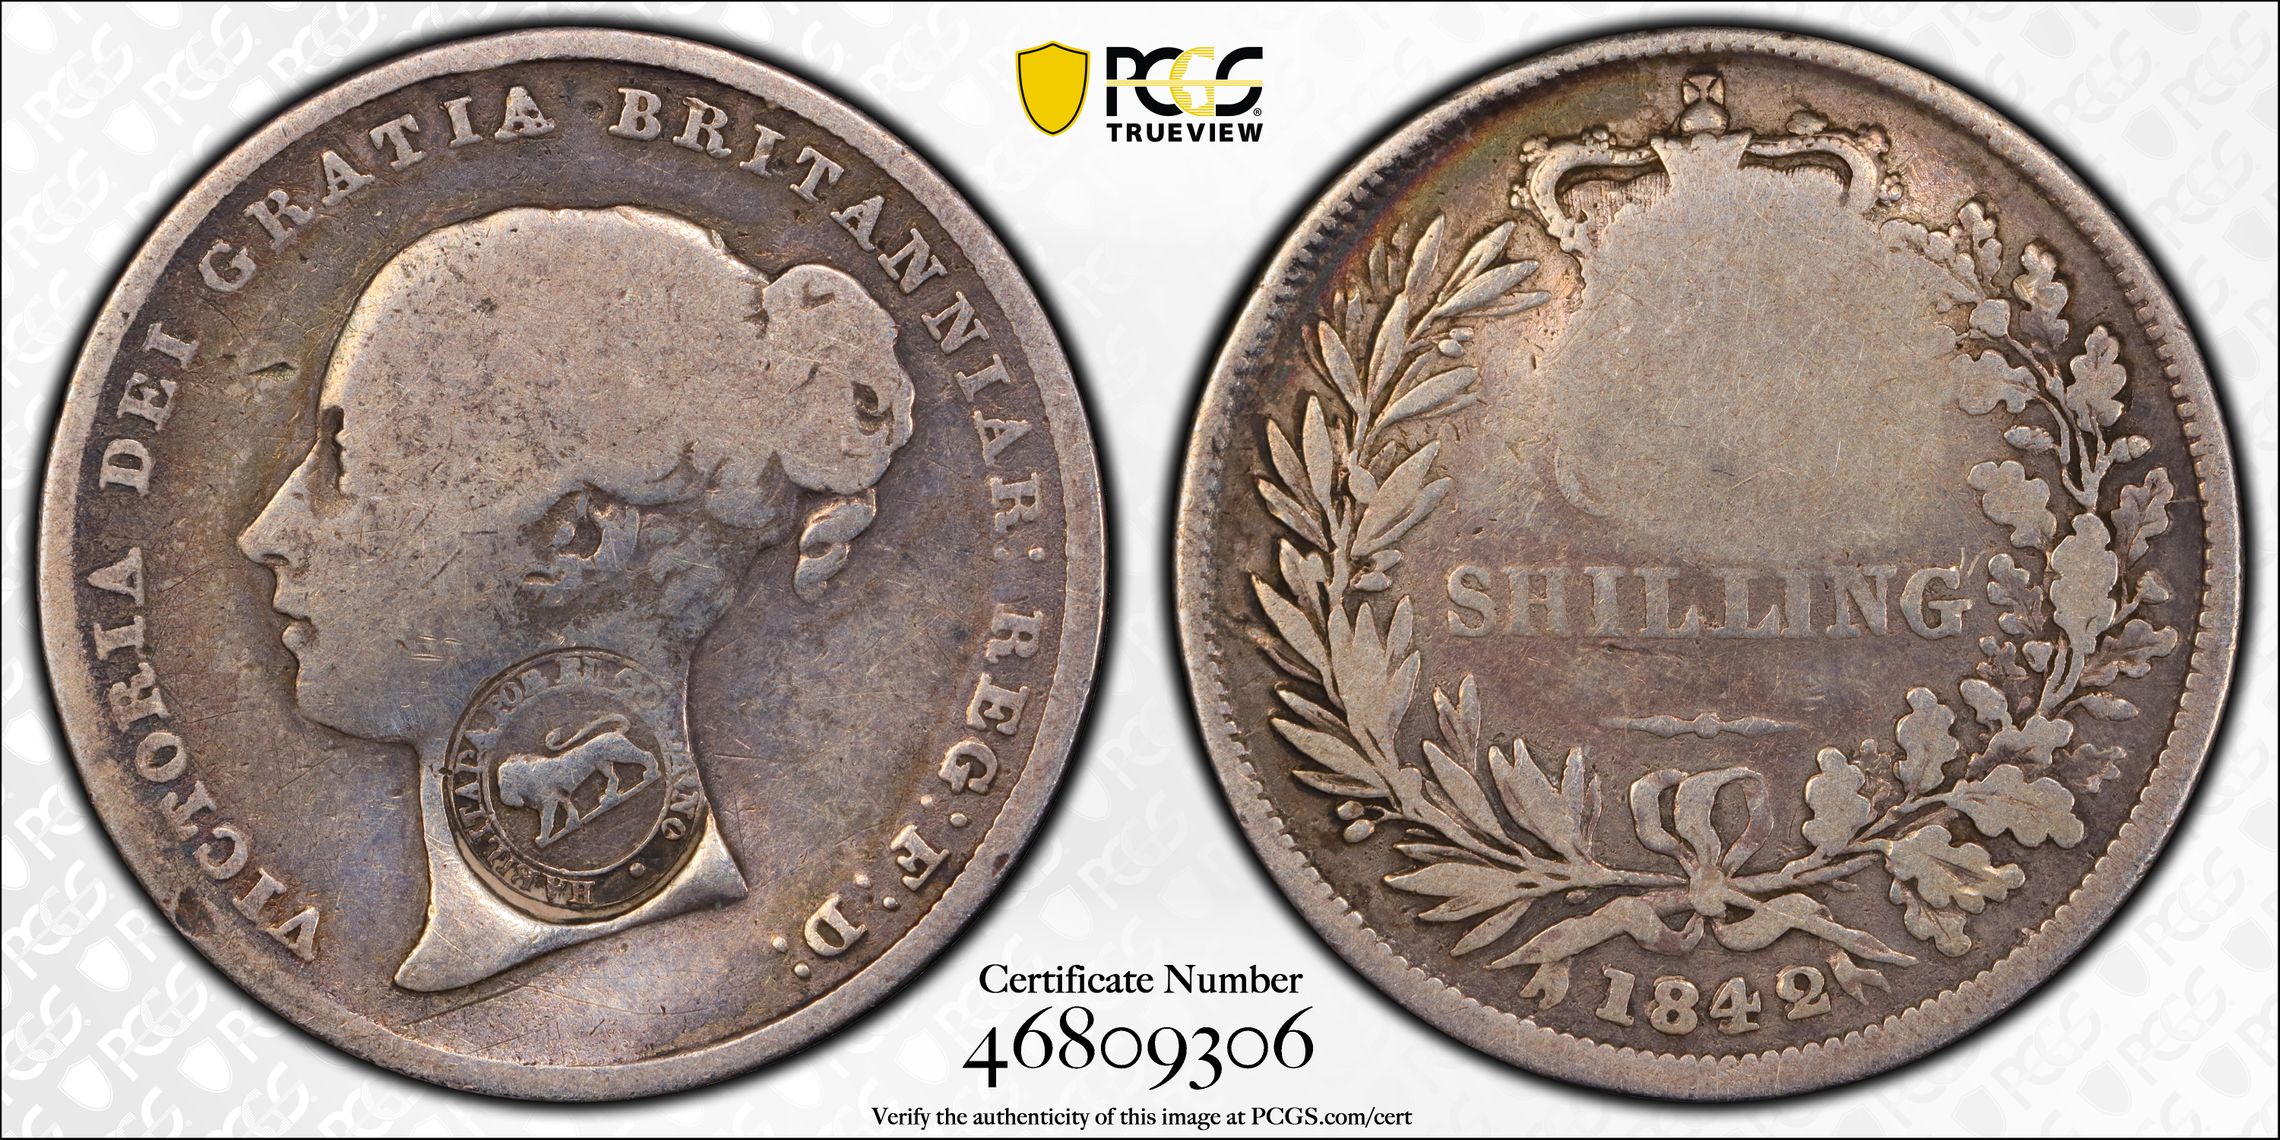 Costa Rica 2 reales Queen Victoria Coat of Arms GB Shil VG10 PCGS silver 1842